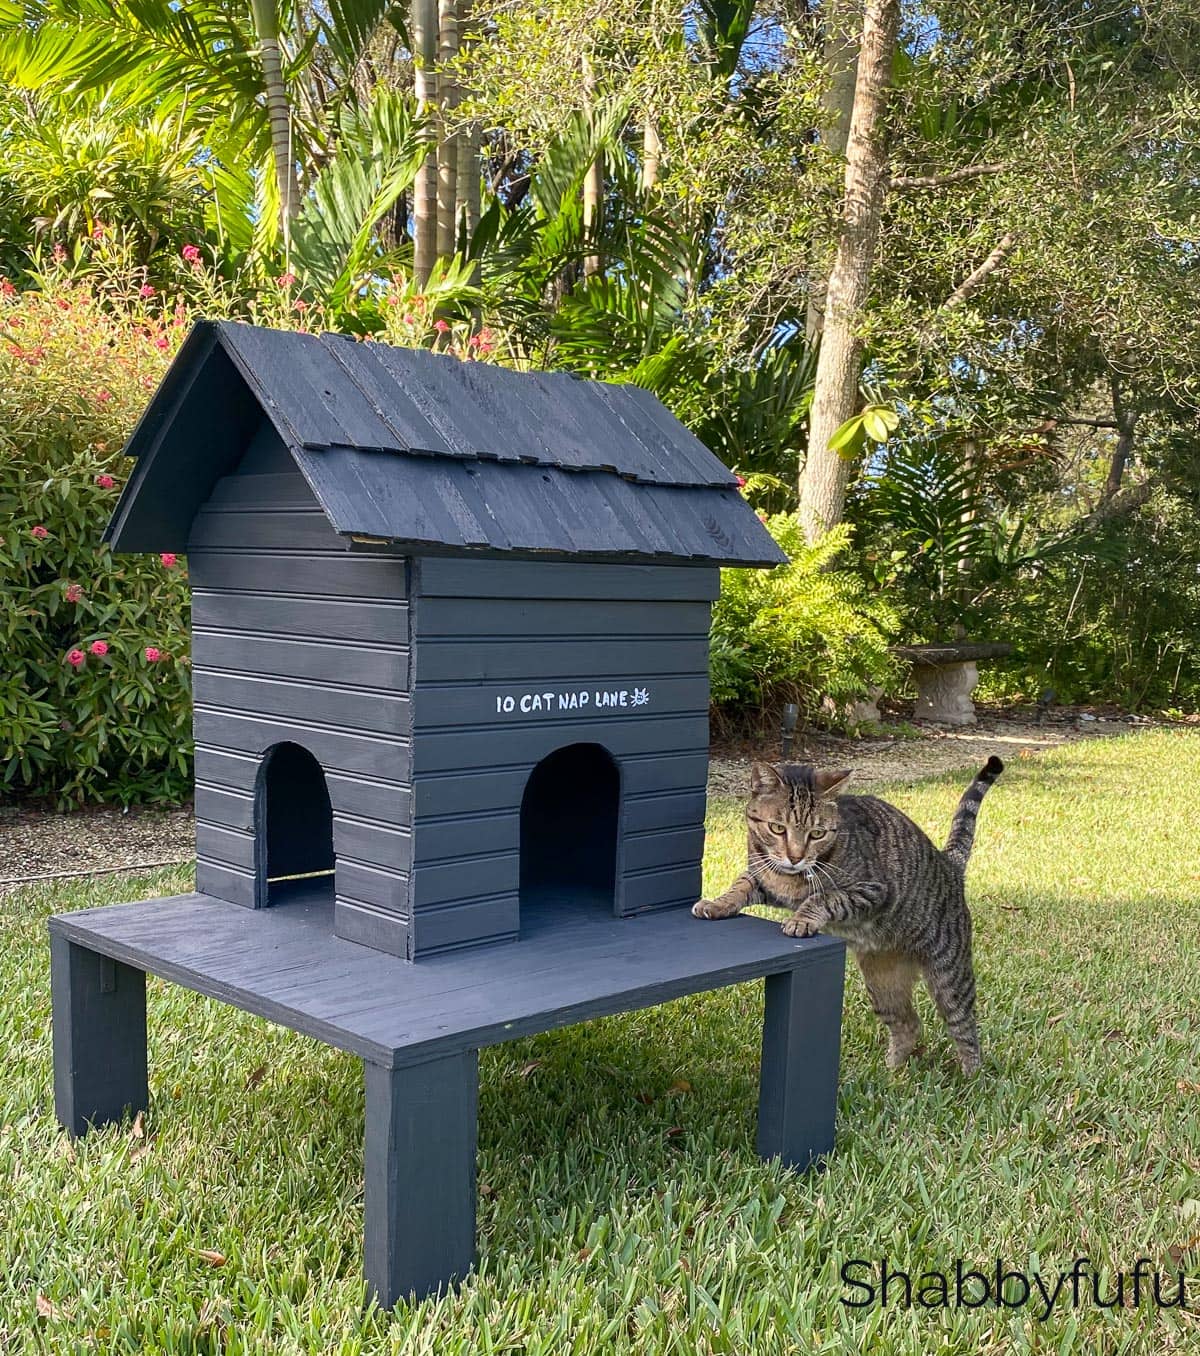 How To Build An Outdoor Cat House Shelter - DIY 